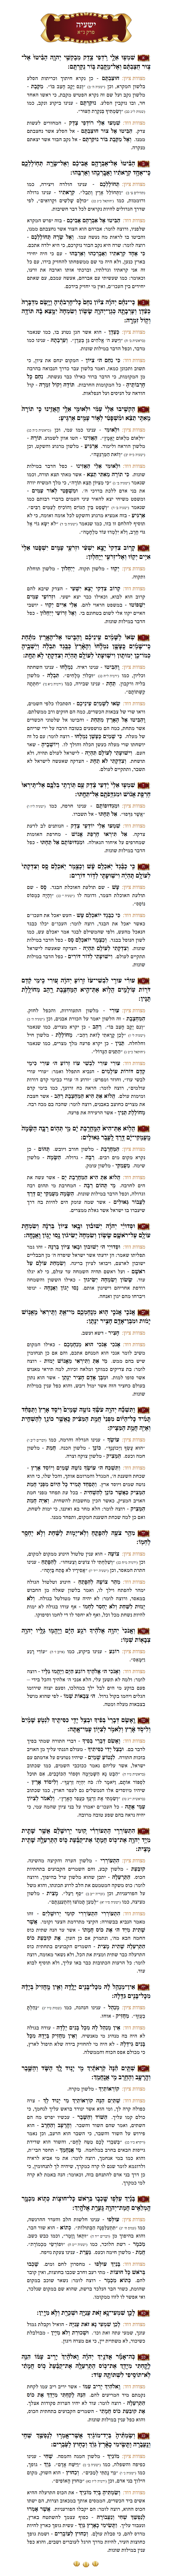 Sefer Yeshayohu Chapter 21 with commentary